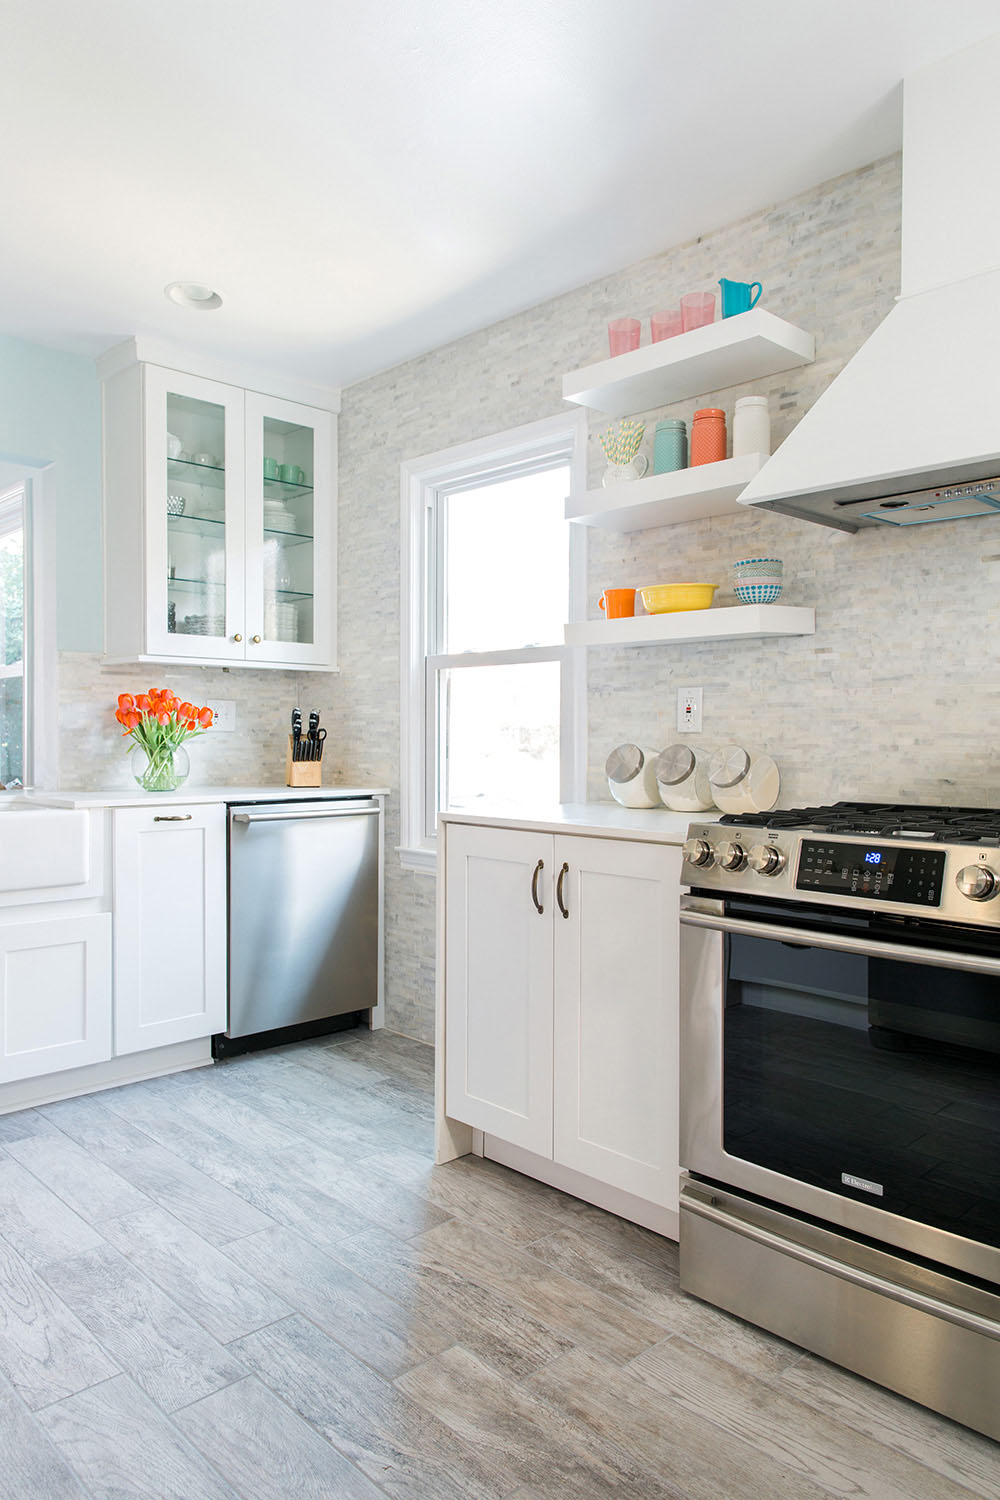 Remodeled kitchen with vinyl flooring, white cabinets, an oven with a white vent hood, and white shelving.